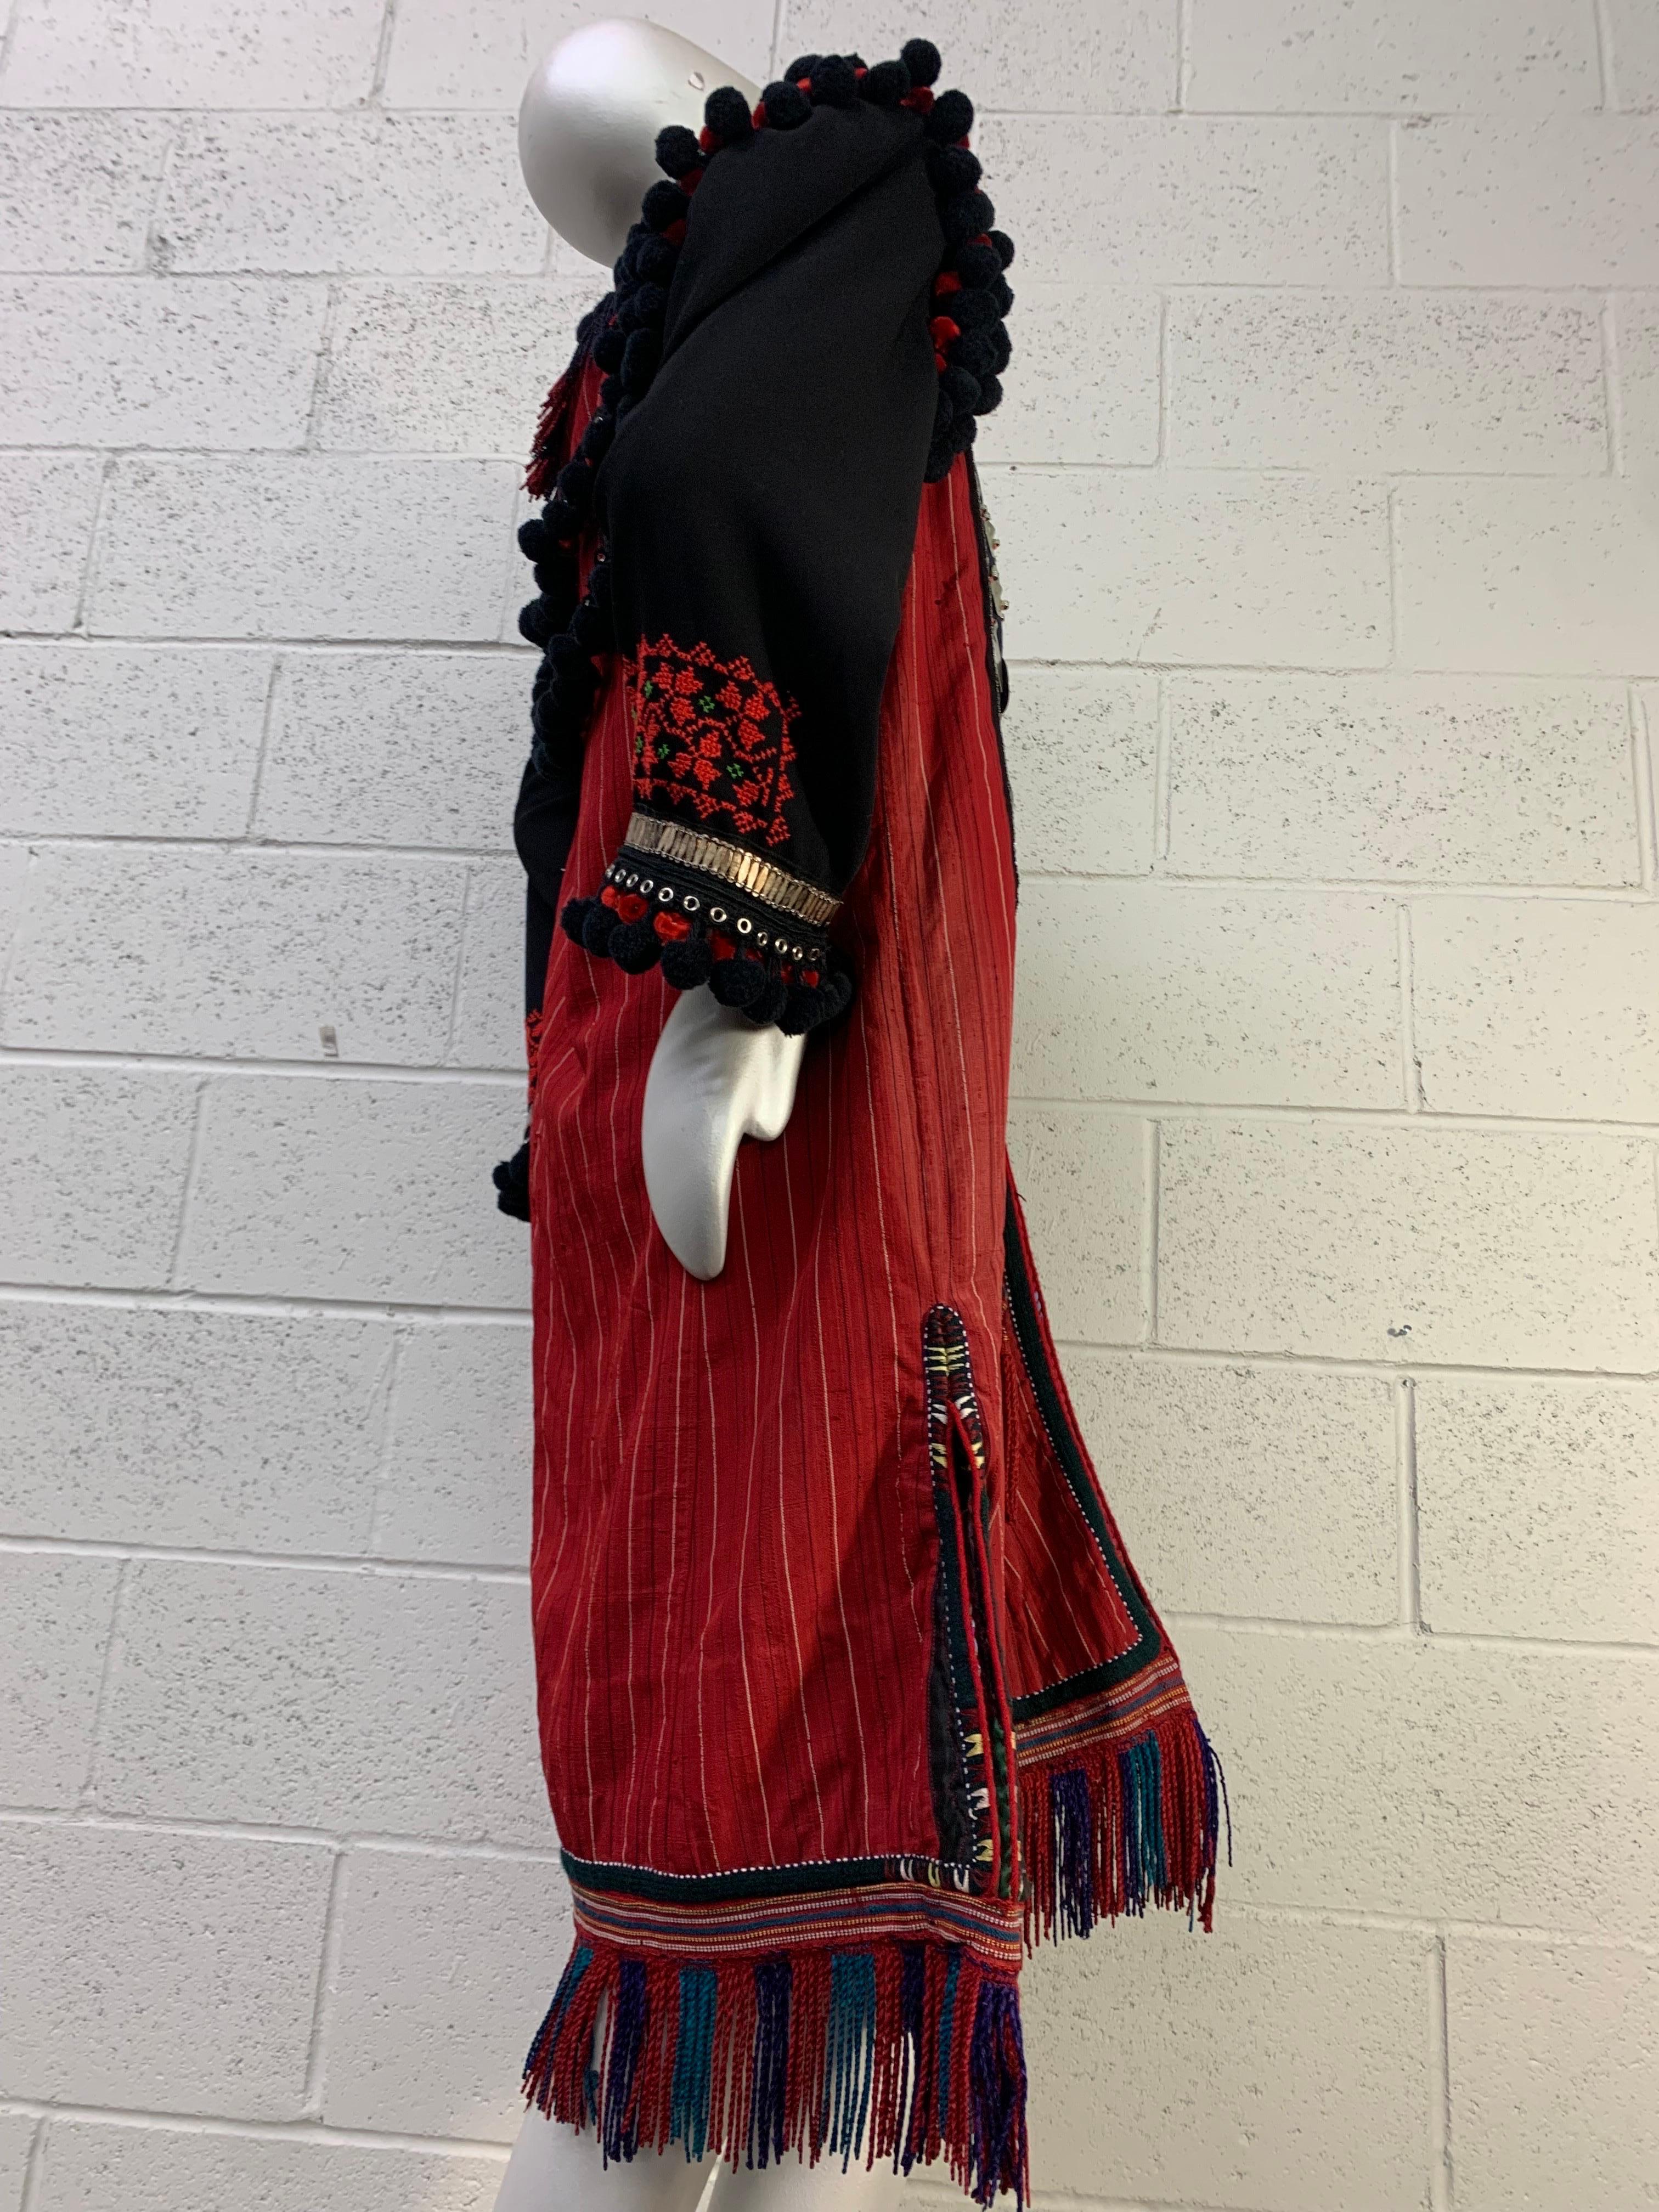 Torso Creations Folkloric Red and Black Cotton Ceremonial Coat w Silver Medallions & PomPom Fringe: Structured shoulders are topped with red and black pompoms. Hemline is fringed. Side slit pockets with embroidery. Coin silver traditional